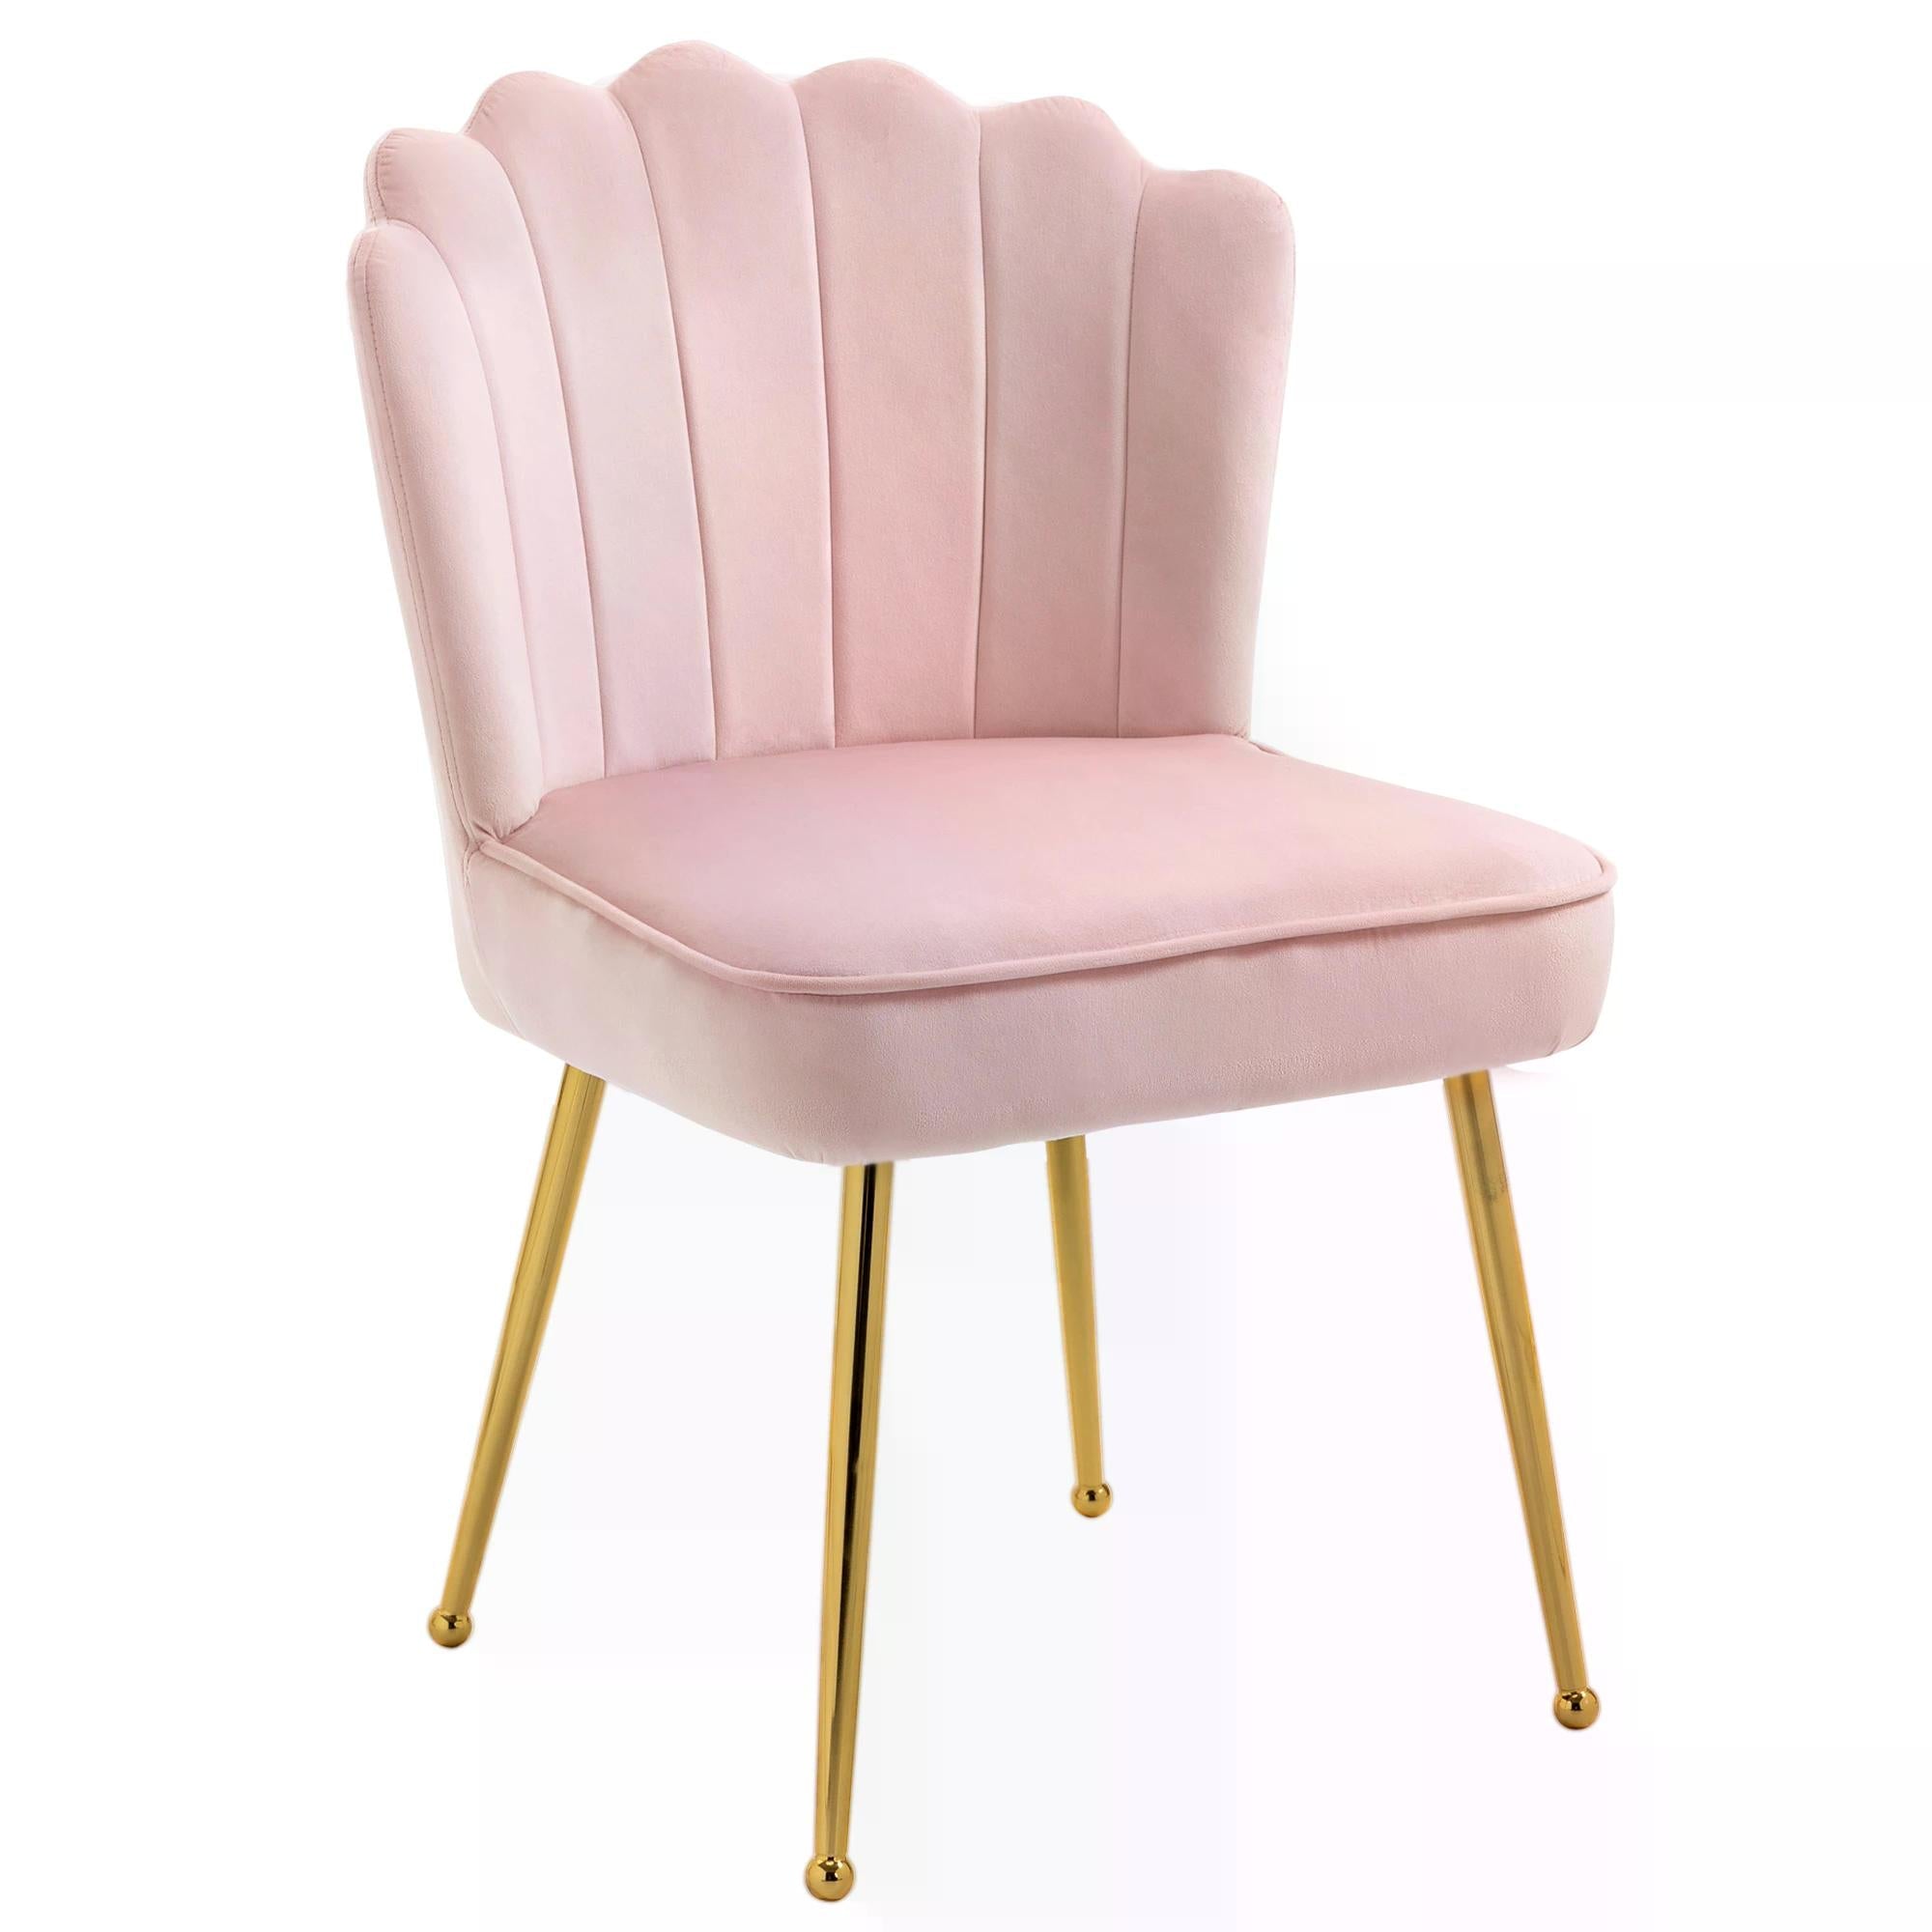 Velvet-Feel Shell Luxe Accent Chair, Glam Vanity Chair Makeup Seat, Home Bedroom Lounge with Metal Legs Comfort Padding, Pink-1